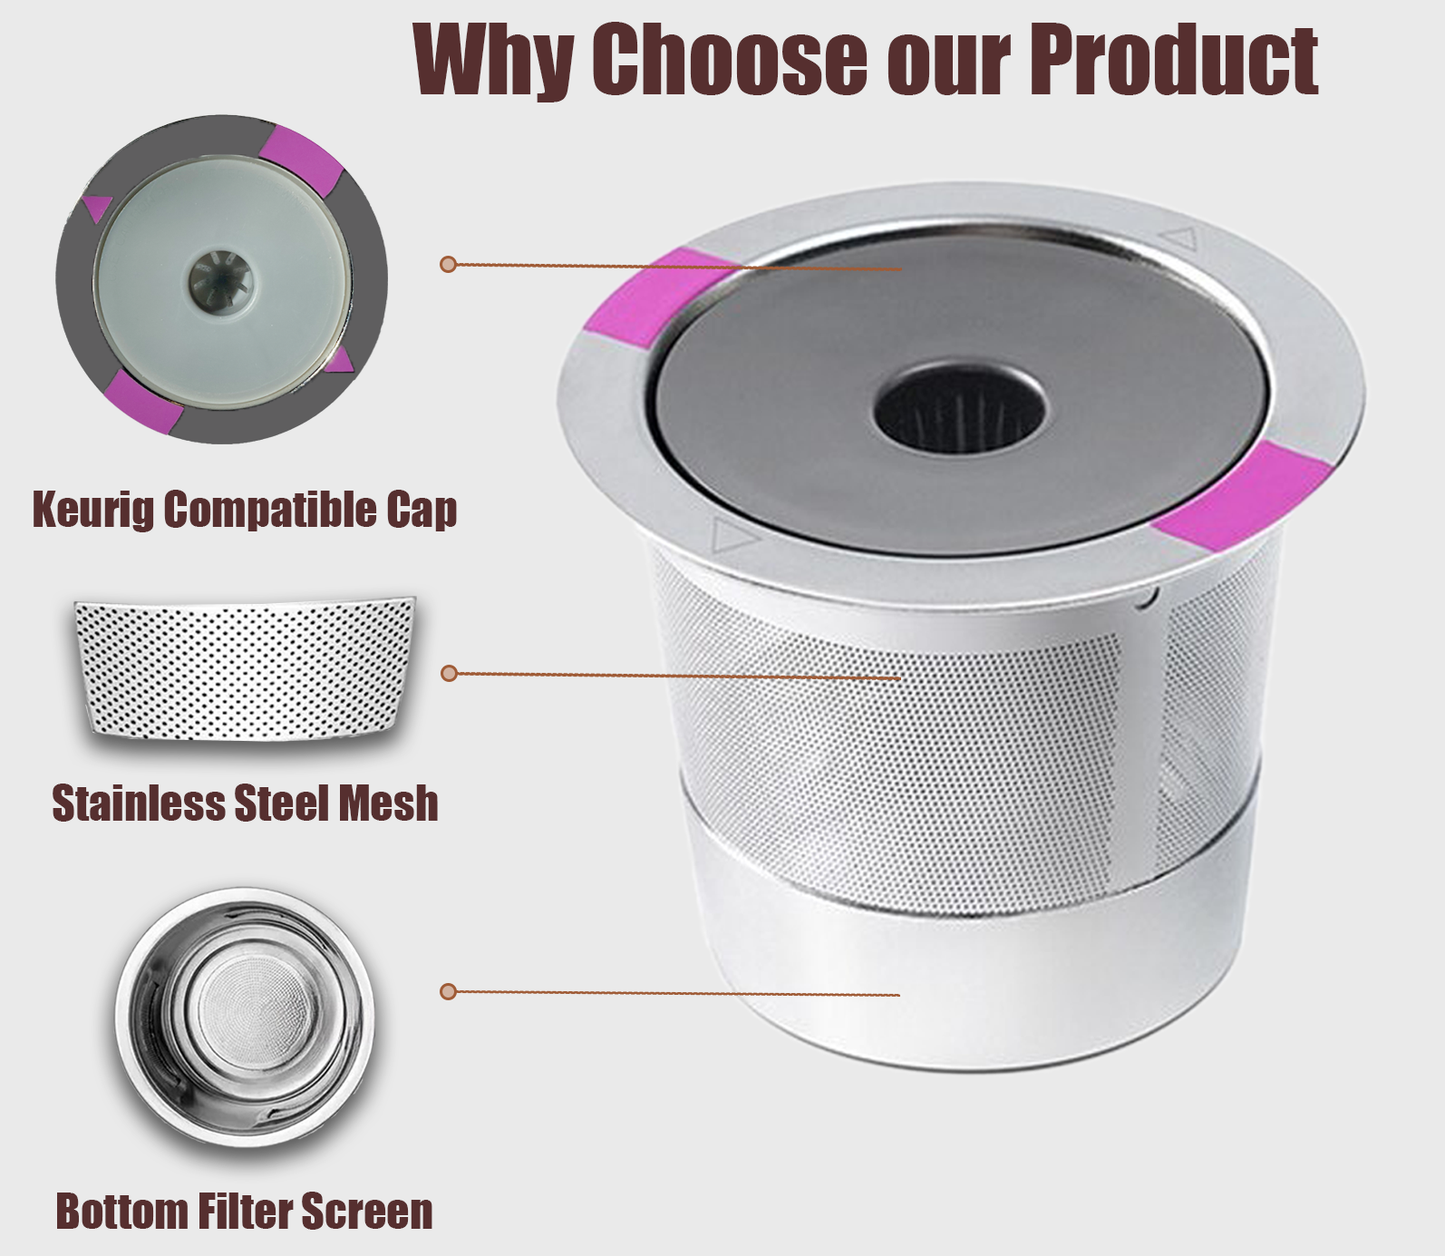 Reusable K Cups Coffee Pod Filters, Keurig 1.0 & 2.0 compatible stainless steel